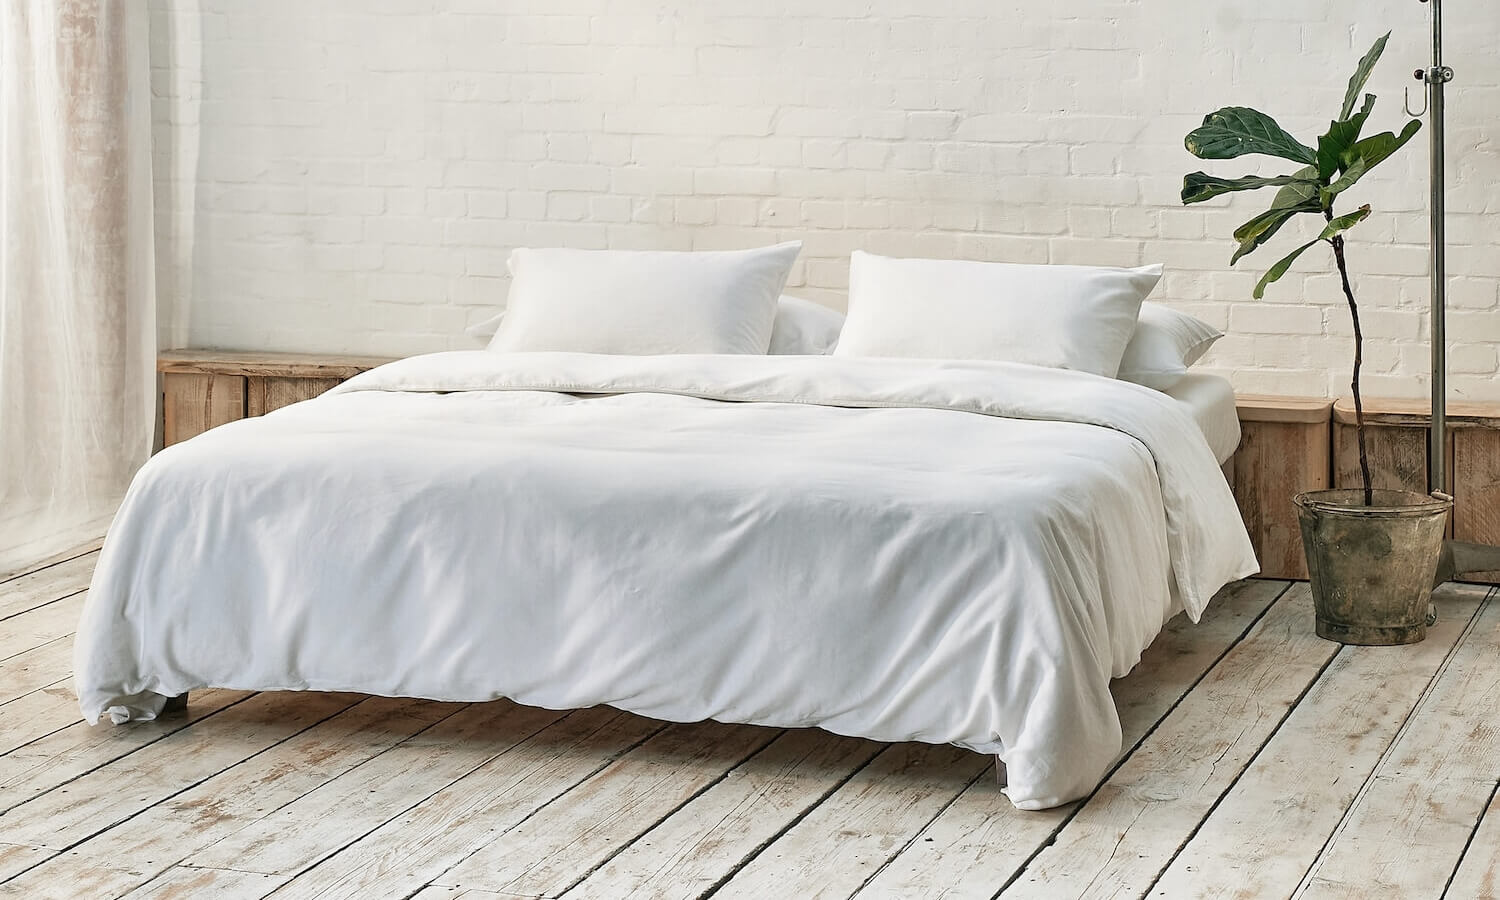 white duvet cover, two pillowcases, and bottom sheet on double bed in apartment with plant and wooden flooring